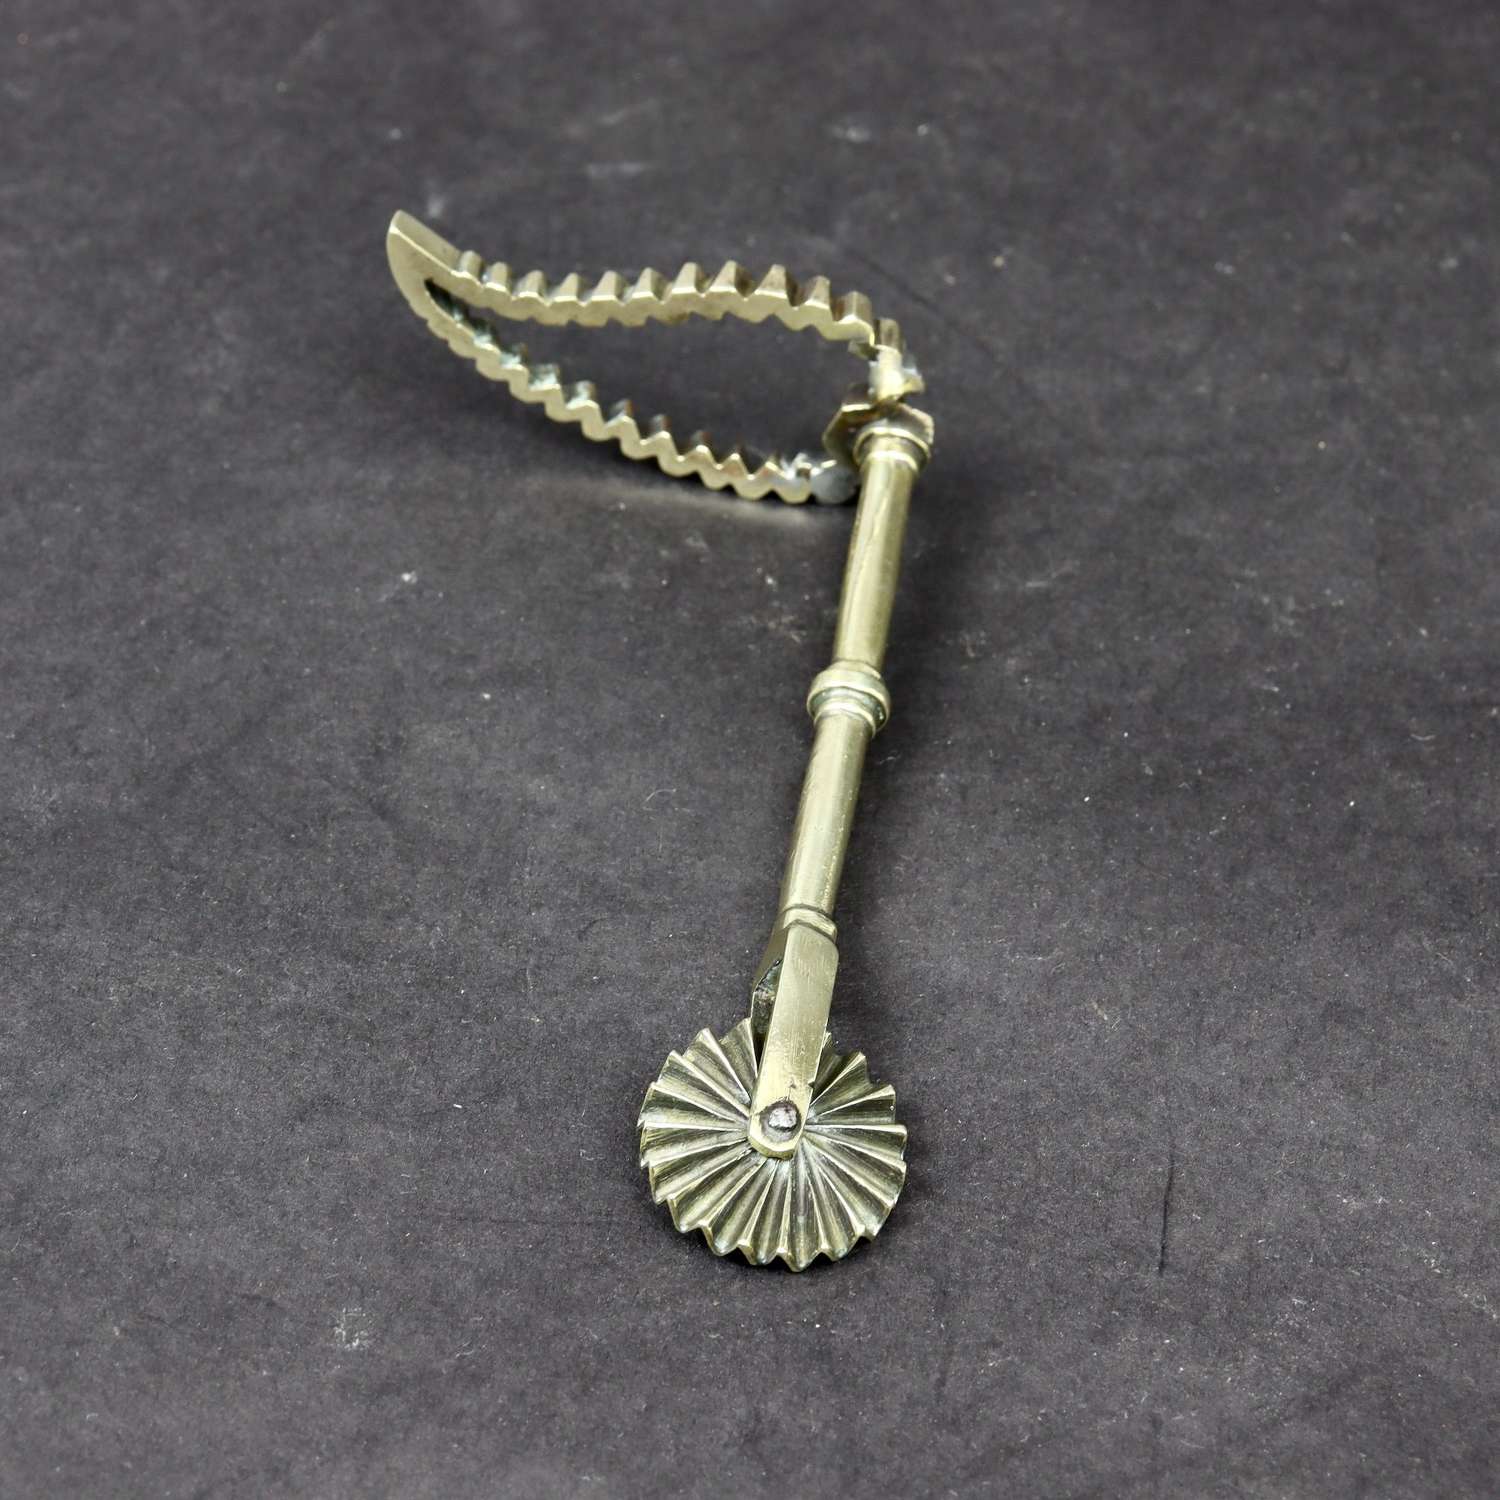 Brass Pastry Tool with Leaf Shaped Cutter